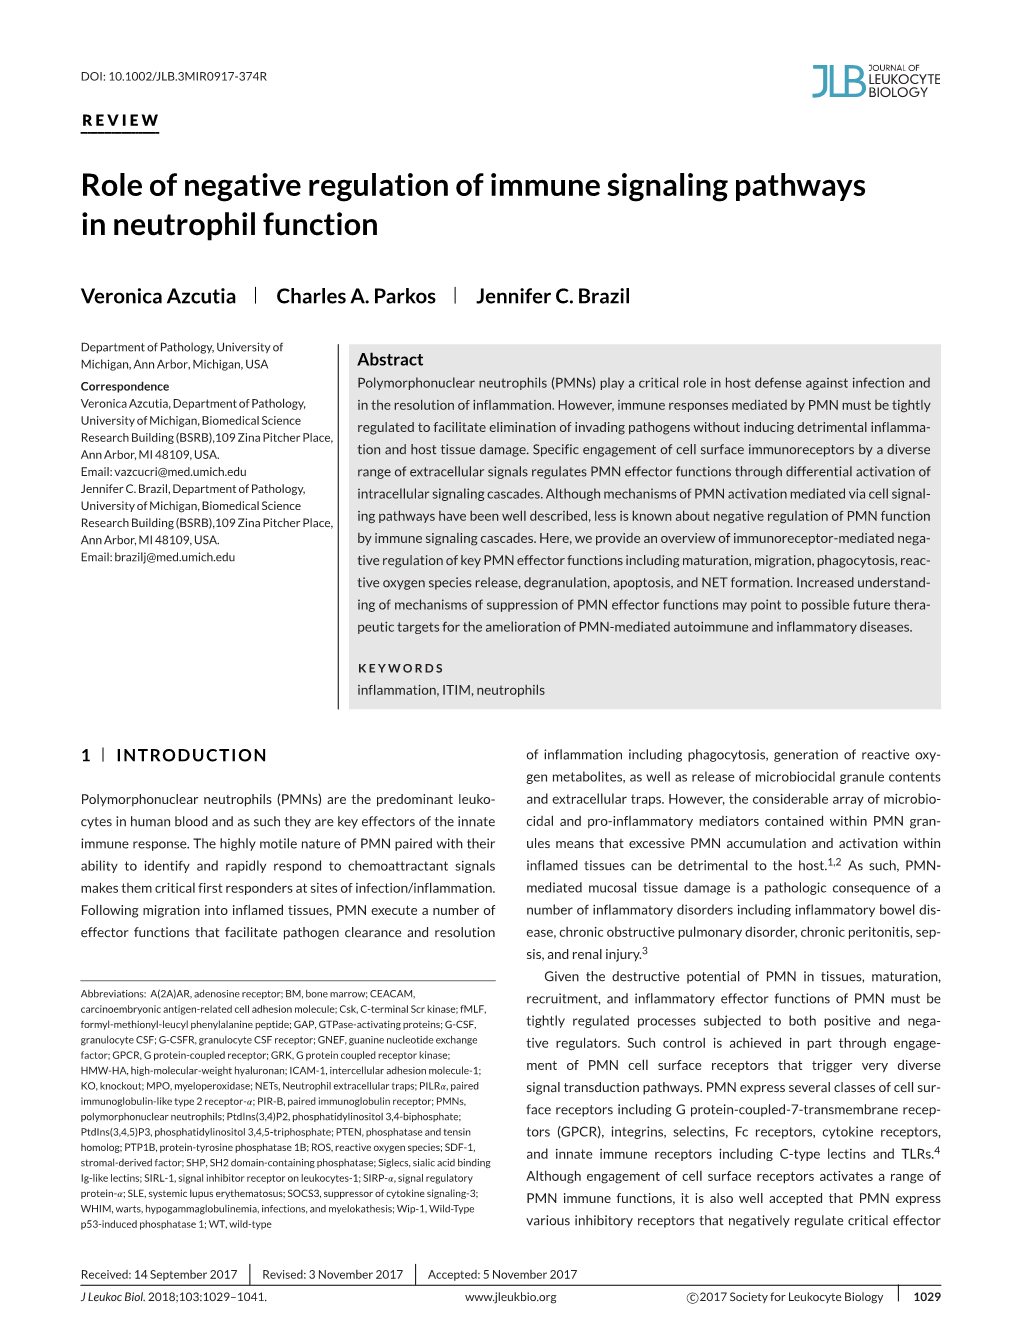 Role of Negative Regulation of Immune Signaling Pathways in Neutrophil Function